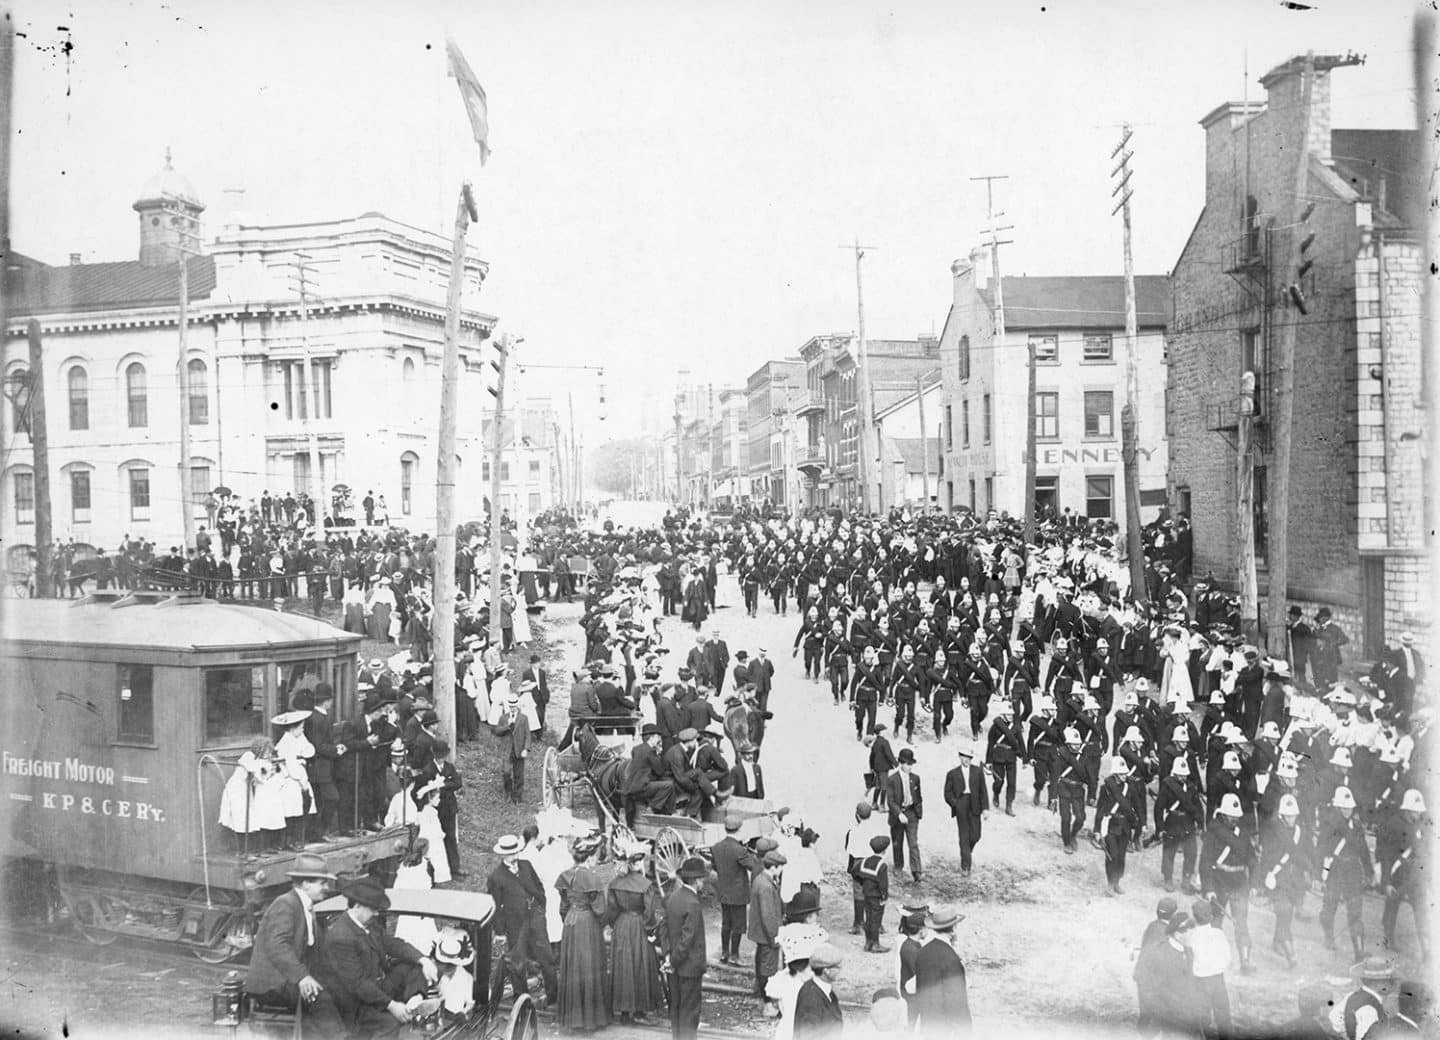 Military parade at the corner of Brock and Ontario Streets in Kingston, Ont. 1890. (Queen's University Archives)